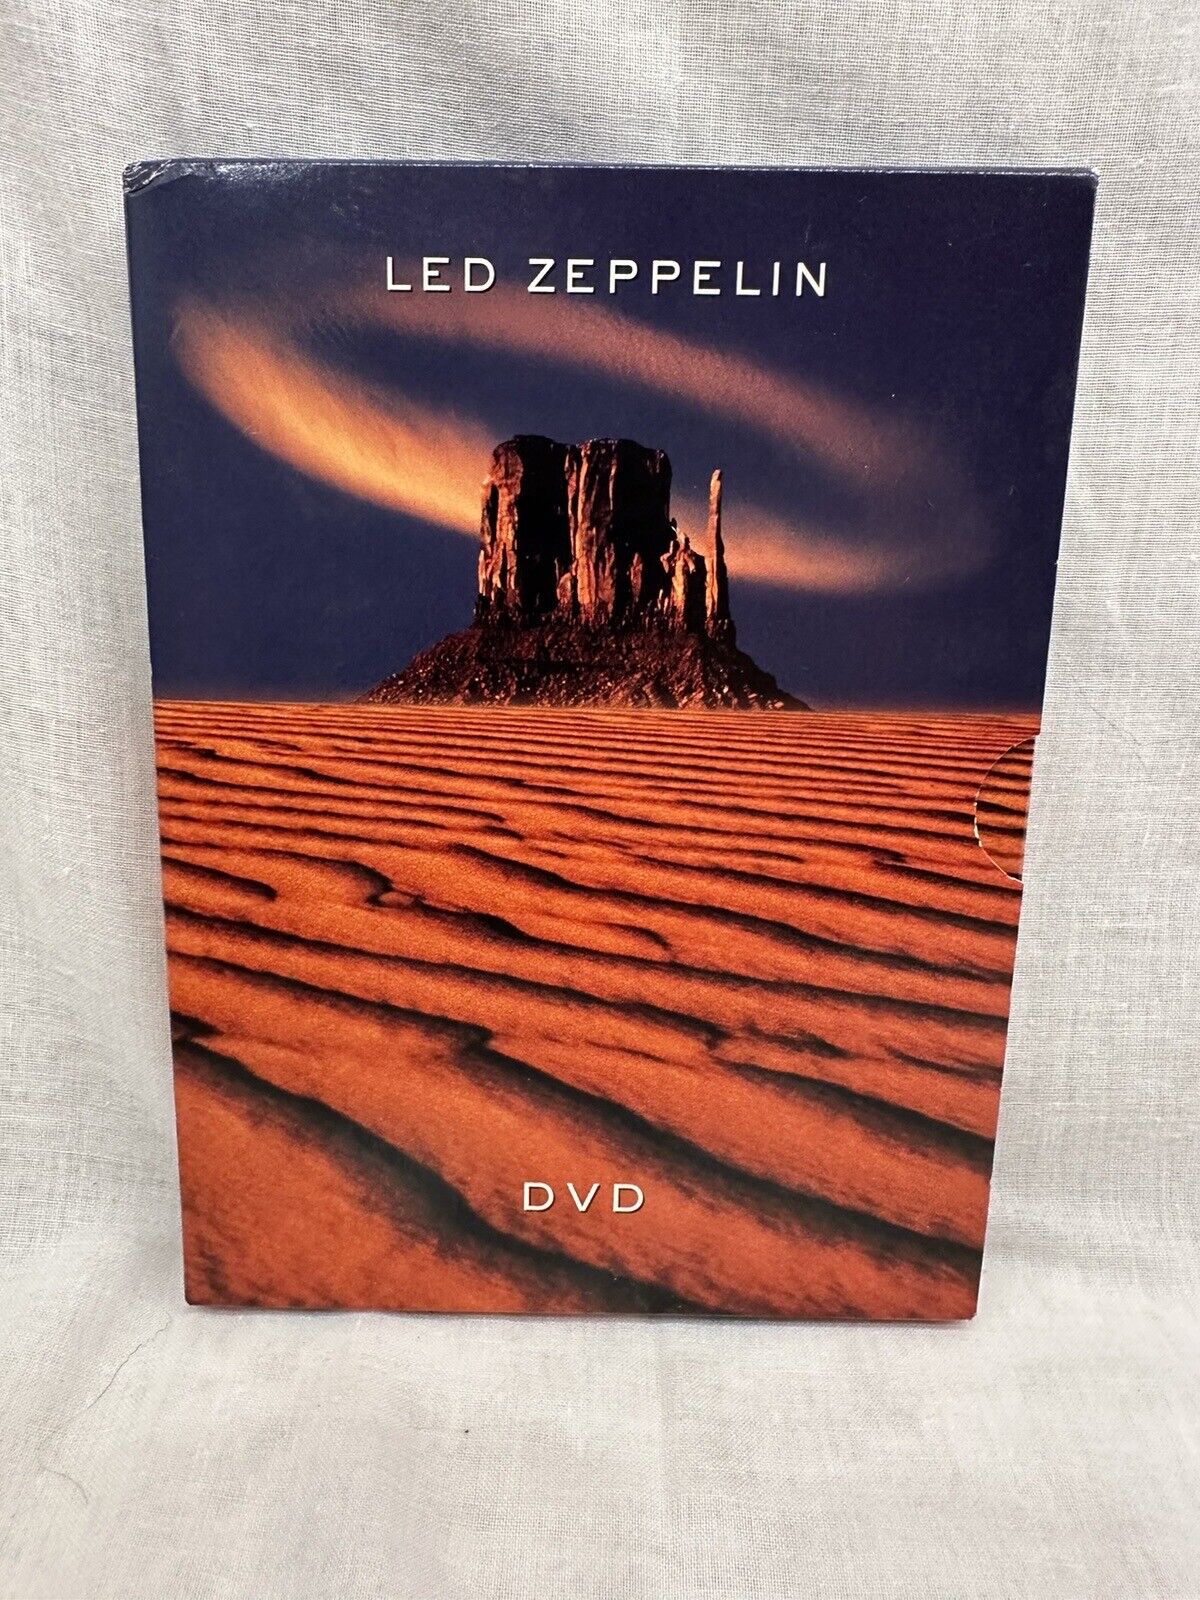 Led Zeppelin 2 Disc DVD Set Live Performances 5 Hours 20 Running Time Exc Cond